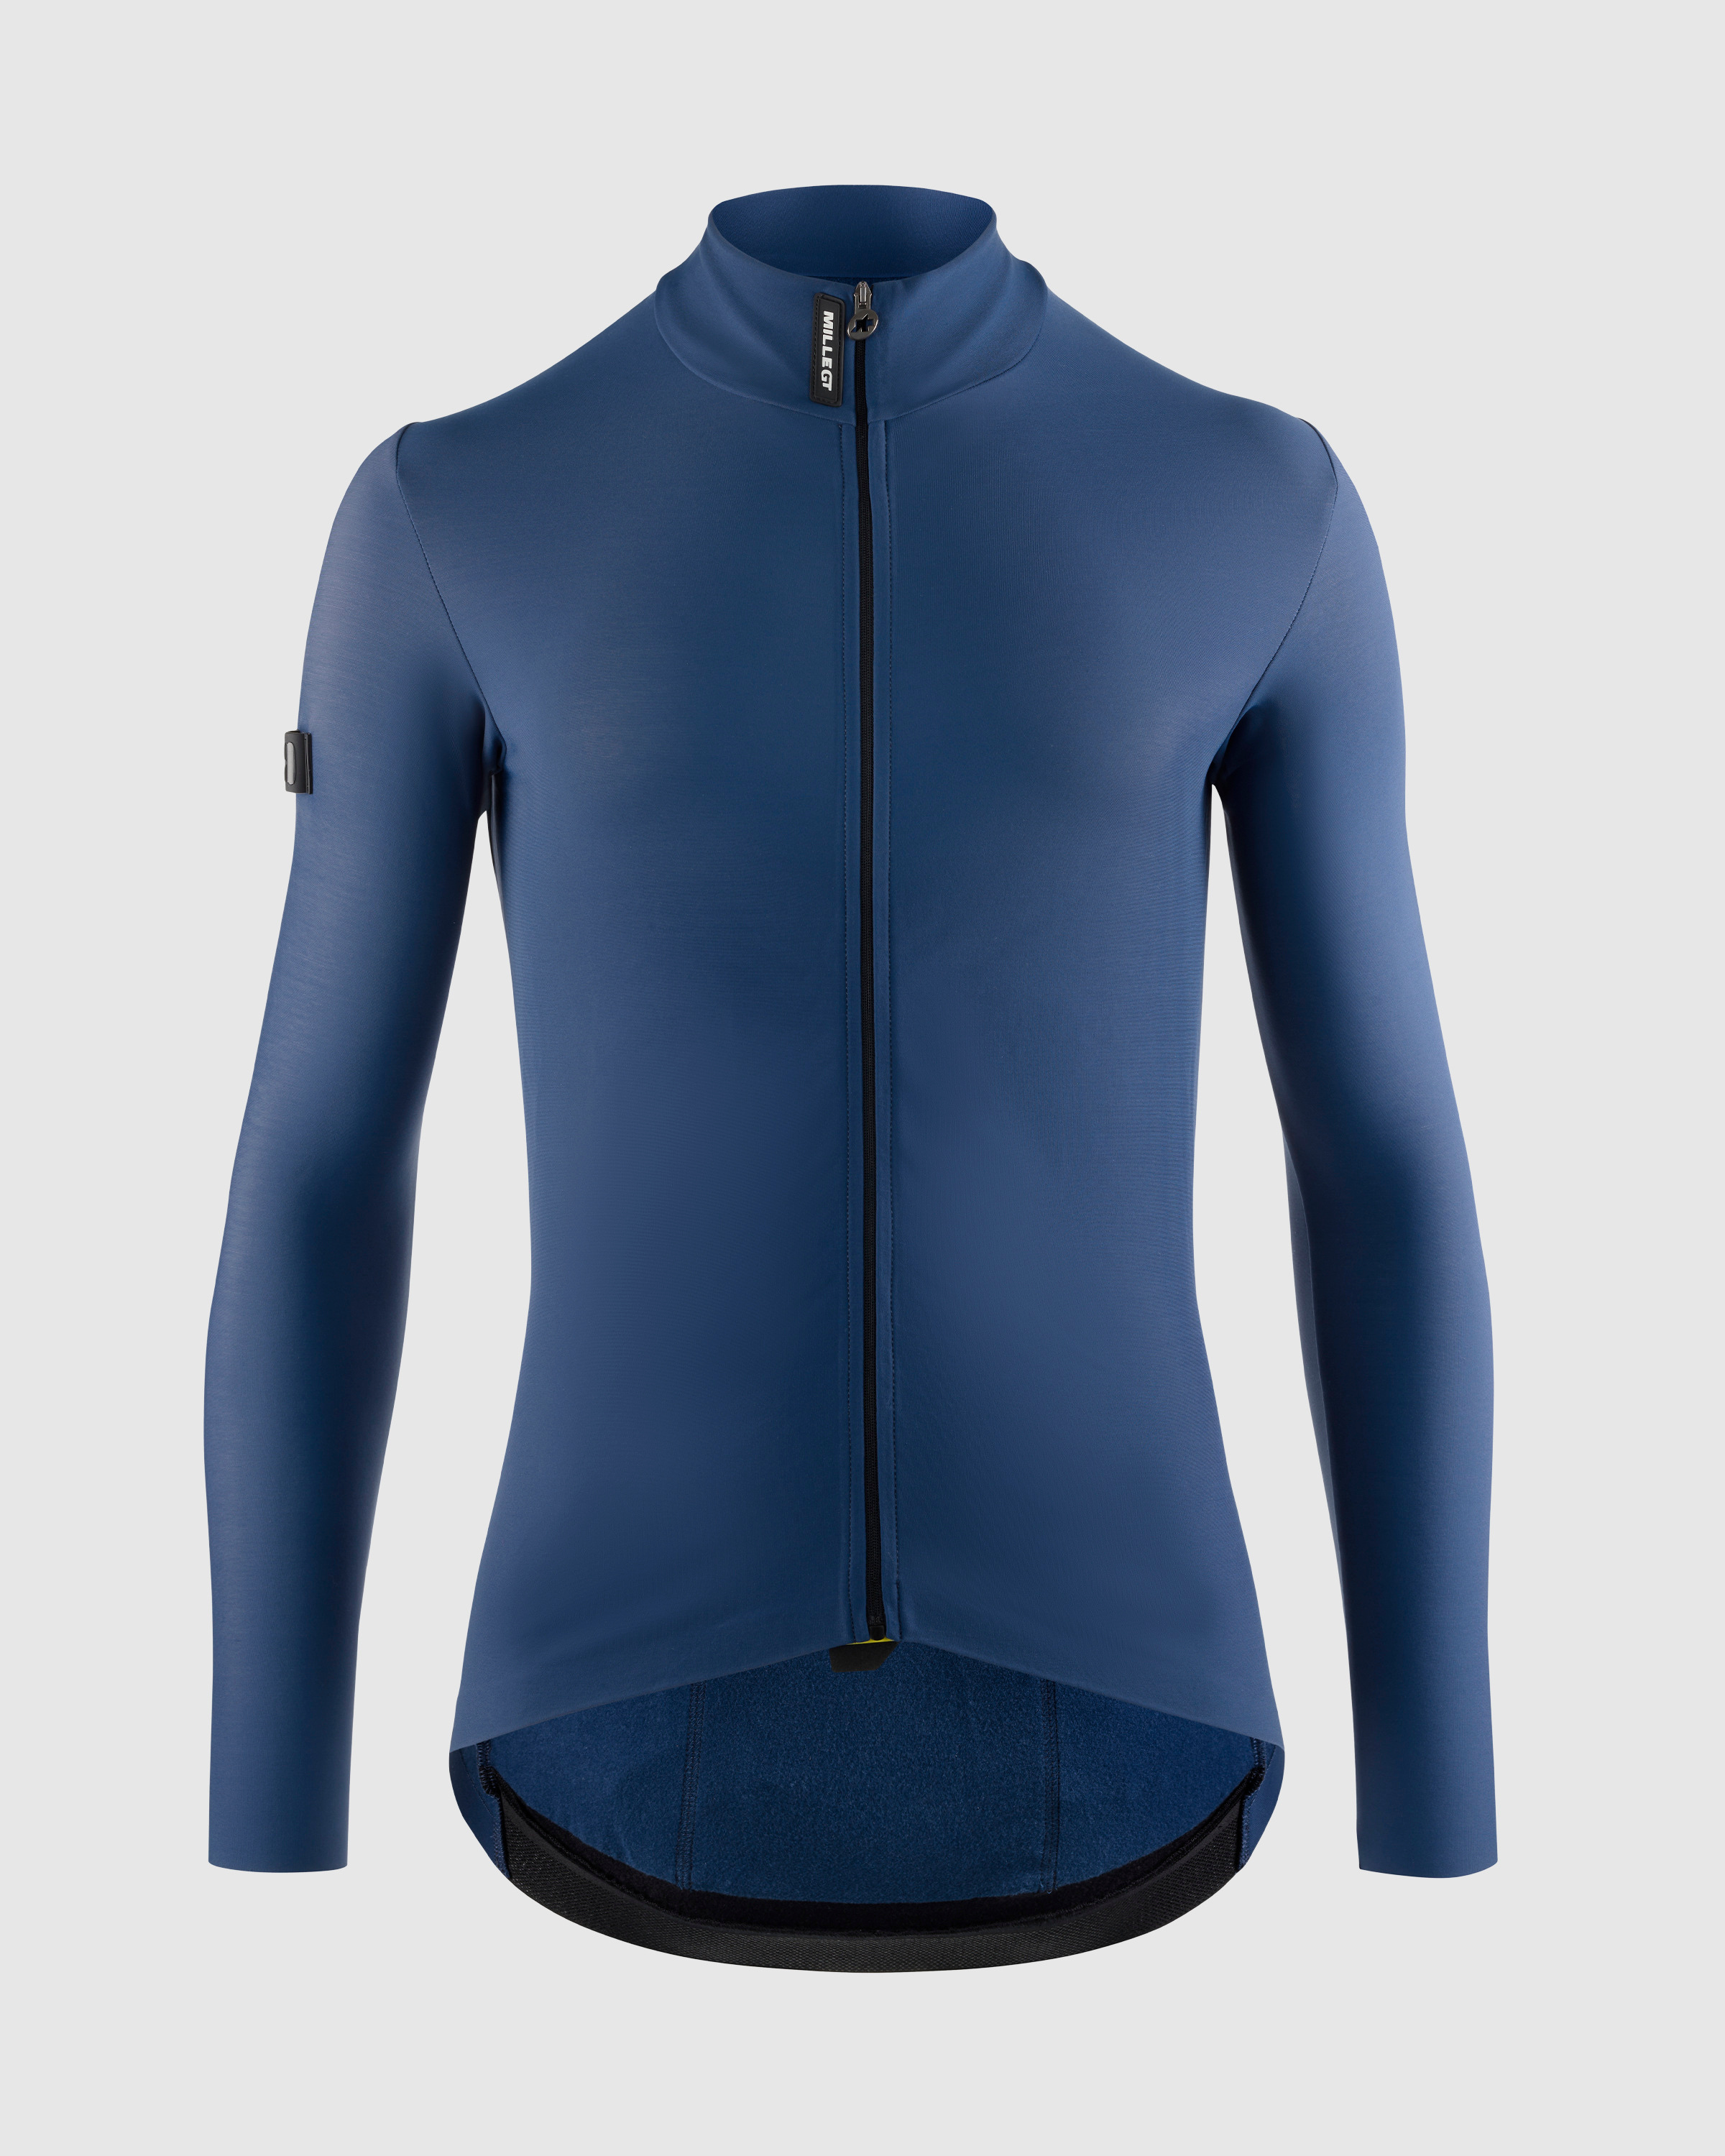 MILLE GT Spring Fall LS Jersey C2